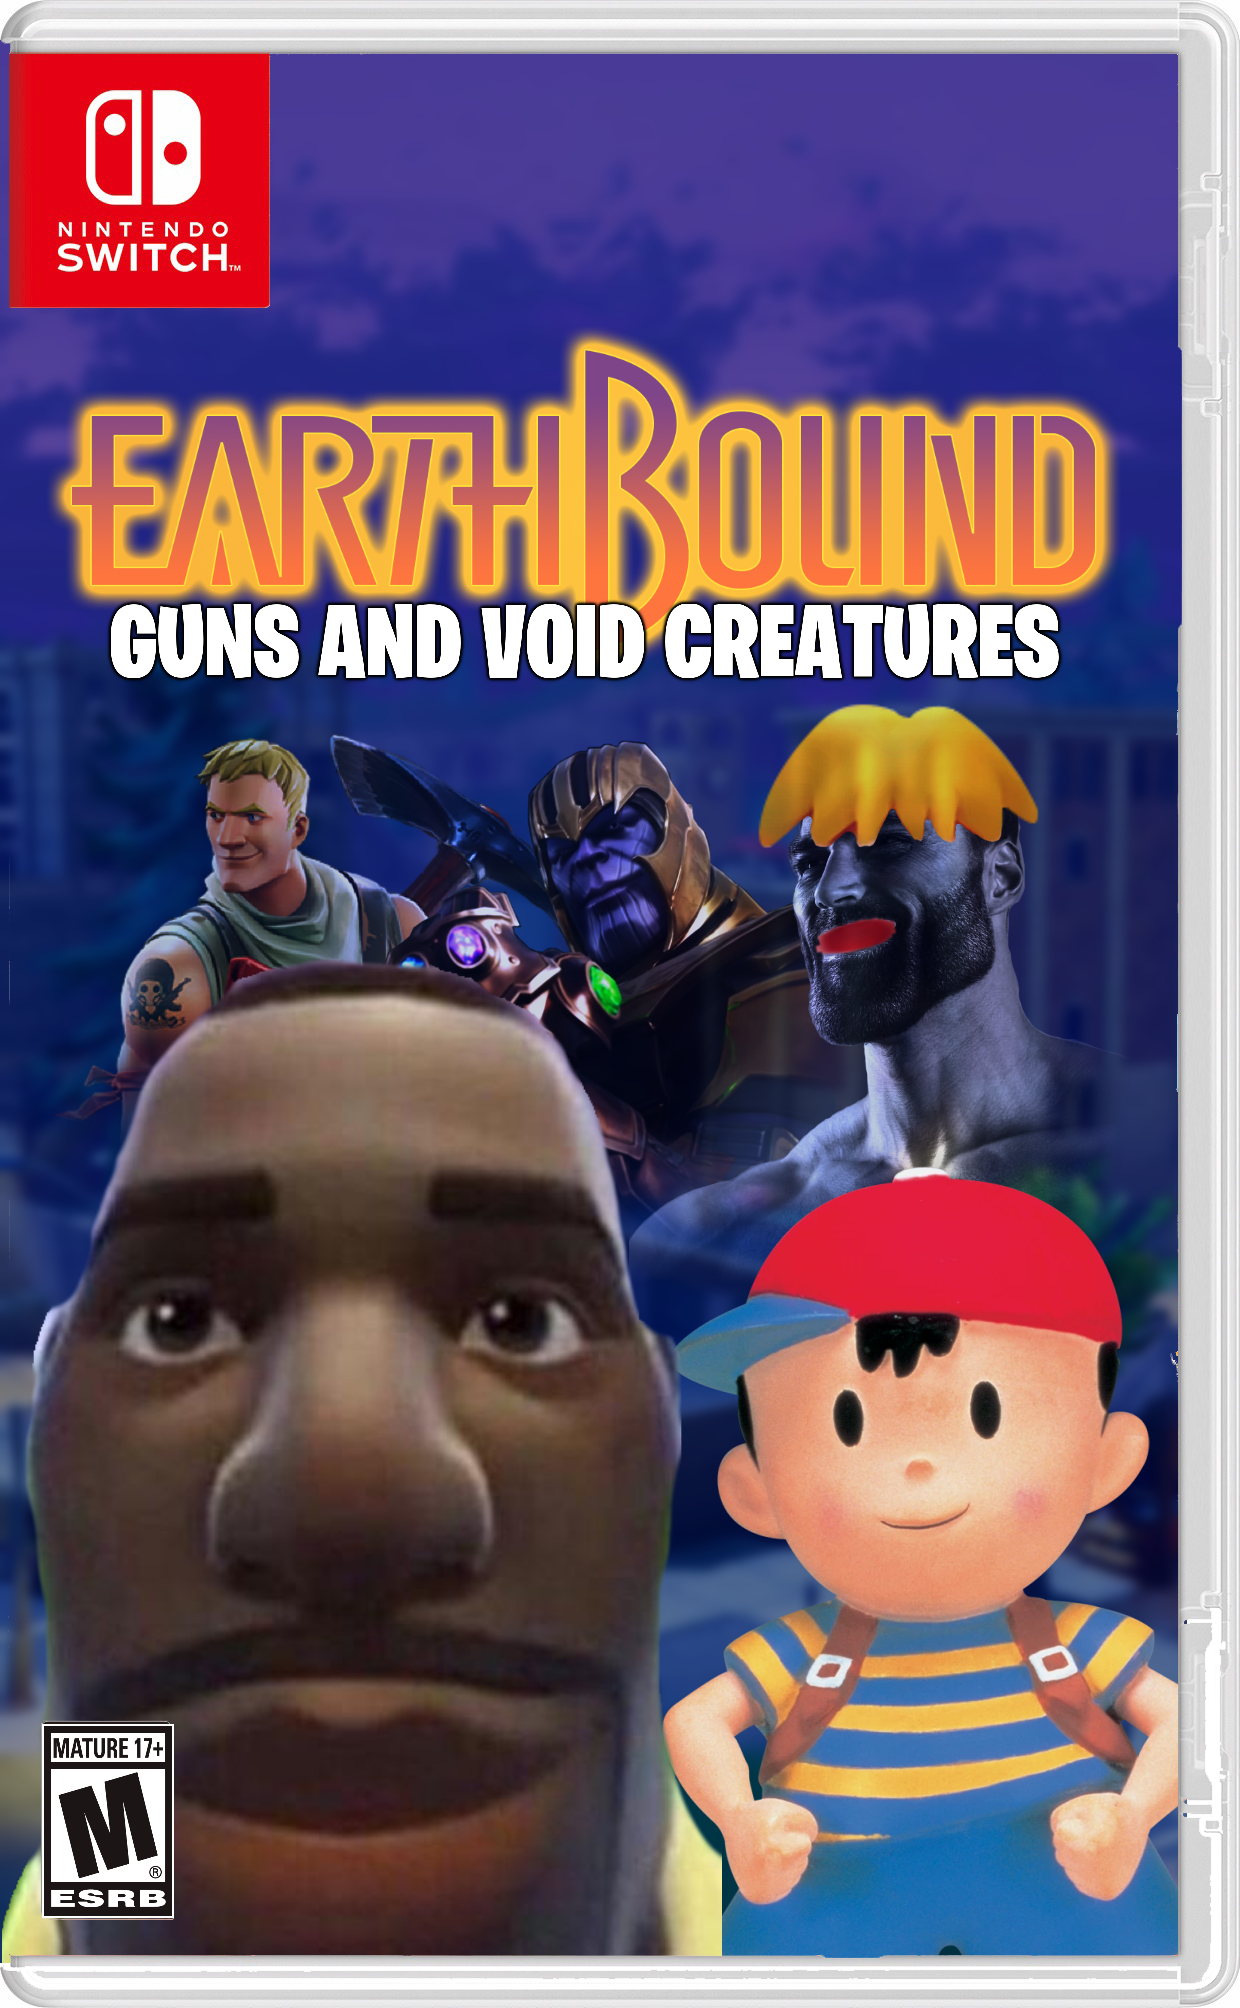 earthbound on switch